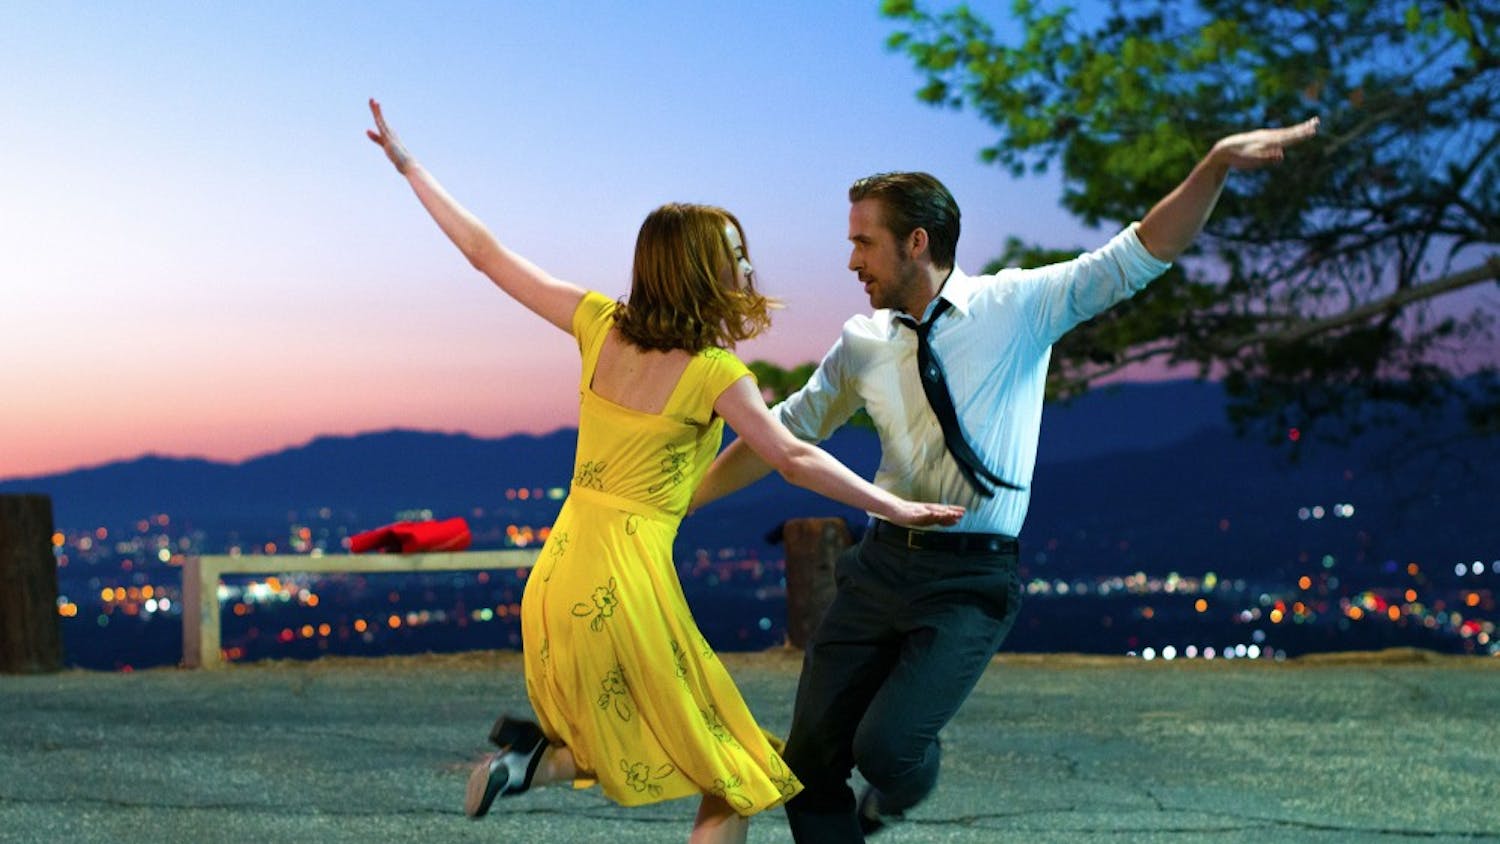 Ryan Gosling as Sebastian and Emma Stone as Mia in a scene from the movie "La La Land," which was nominated for a record-tying 14 Oscars. (Dale Robinette/Lionsgate/TNS)